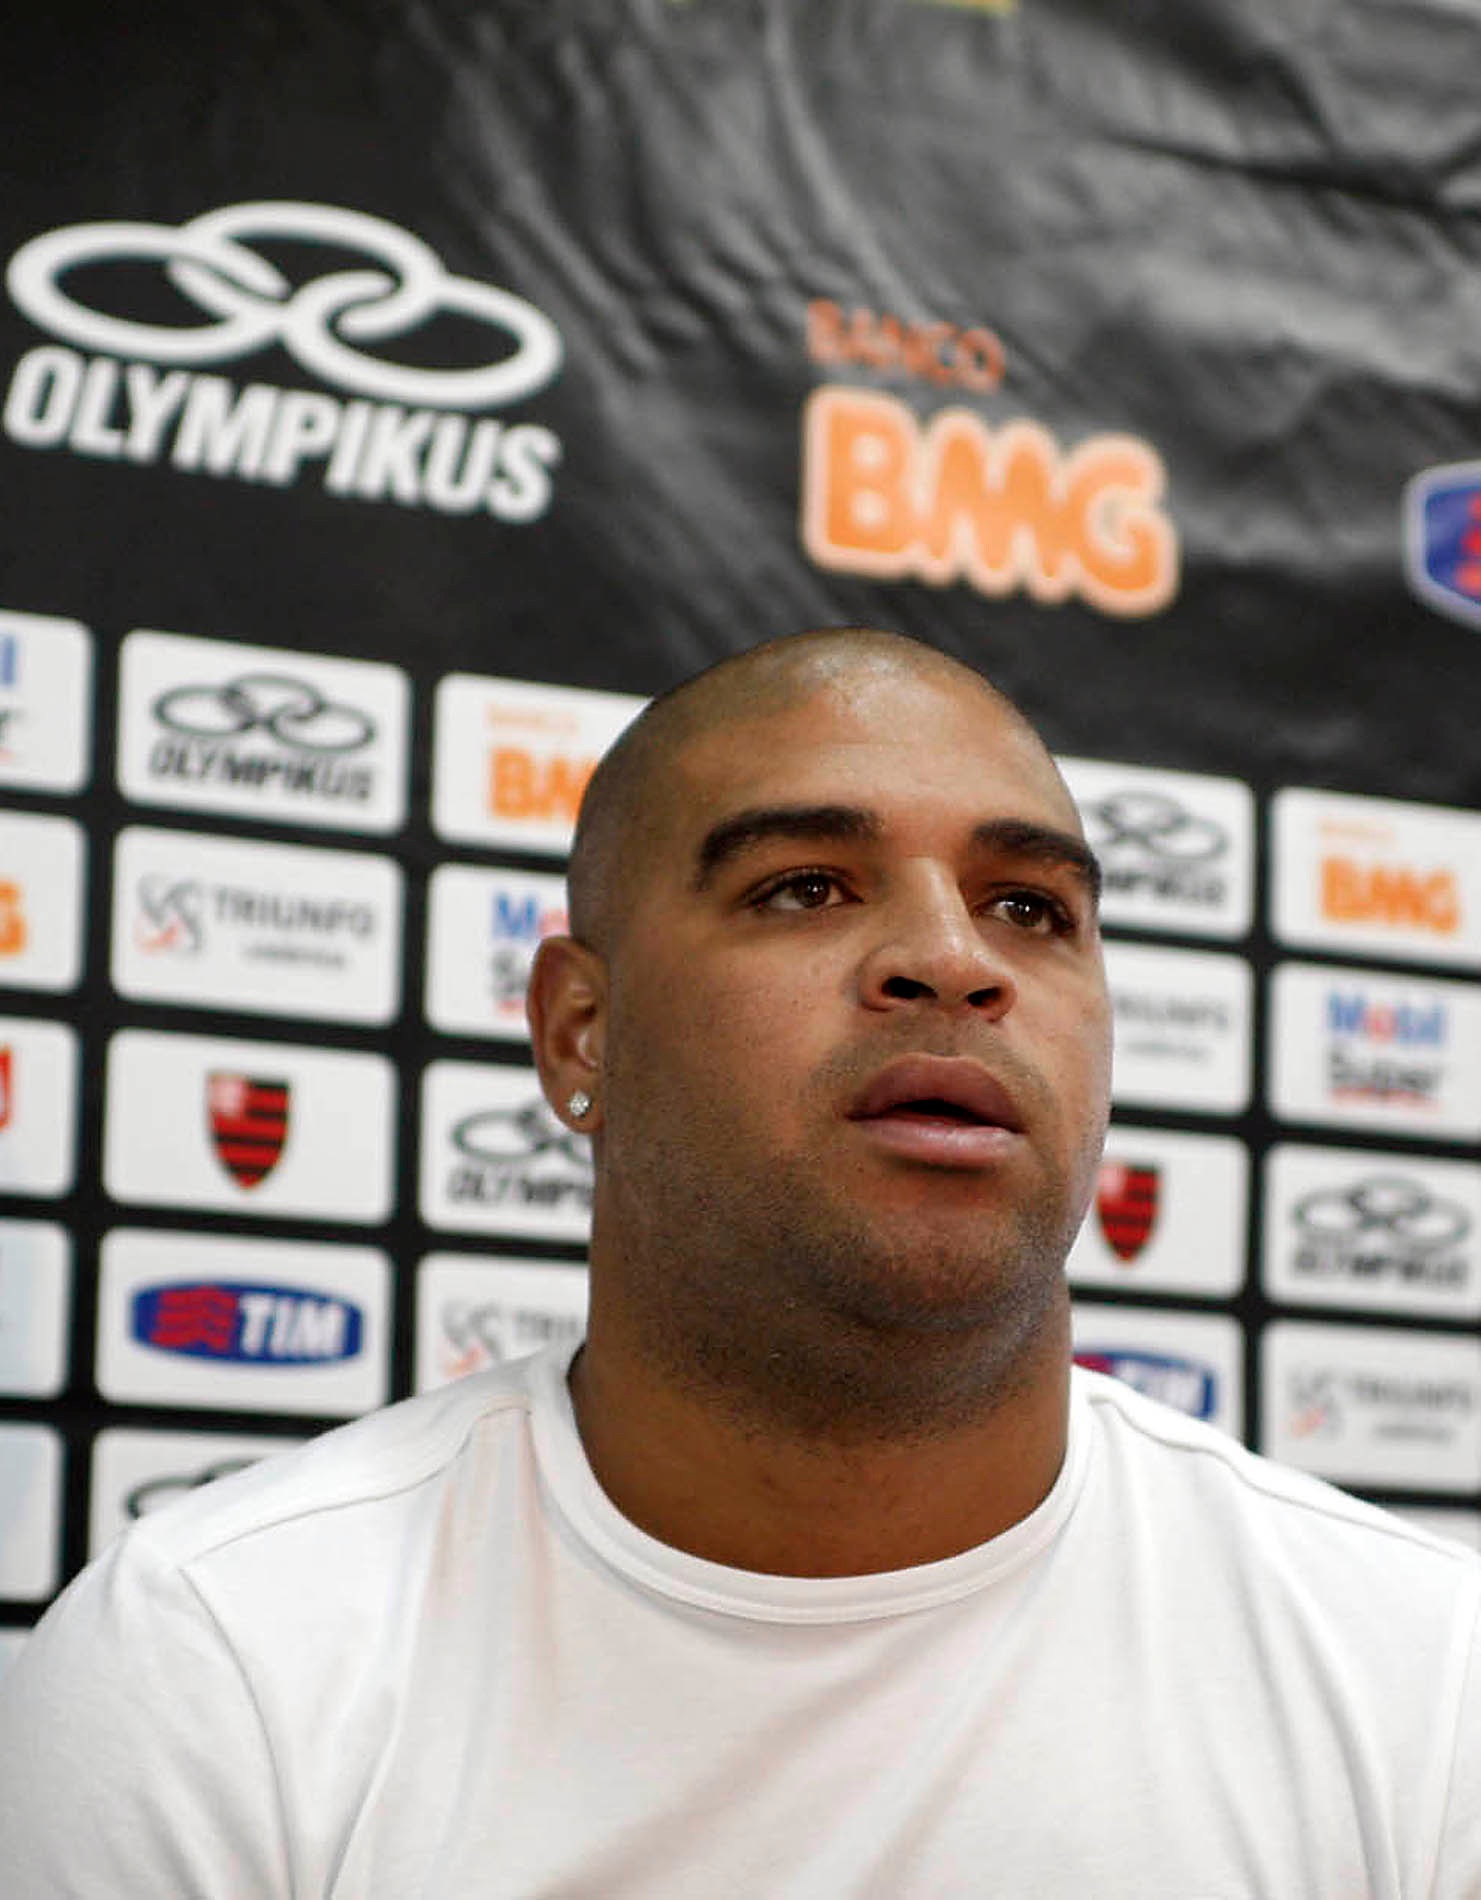 Adriano Resigns from Flamengo: Daily